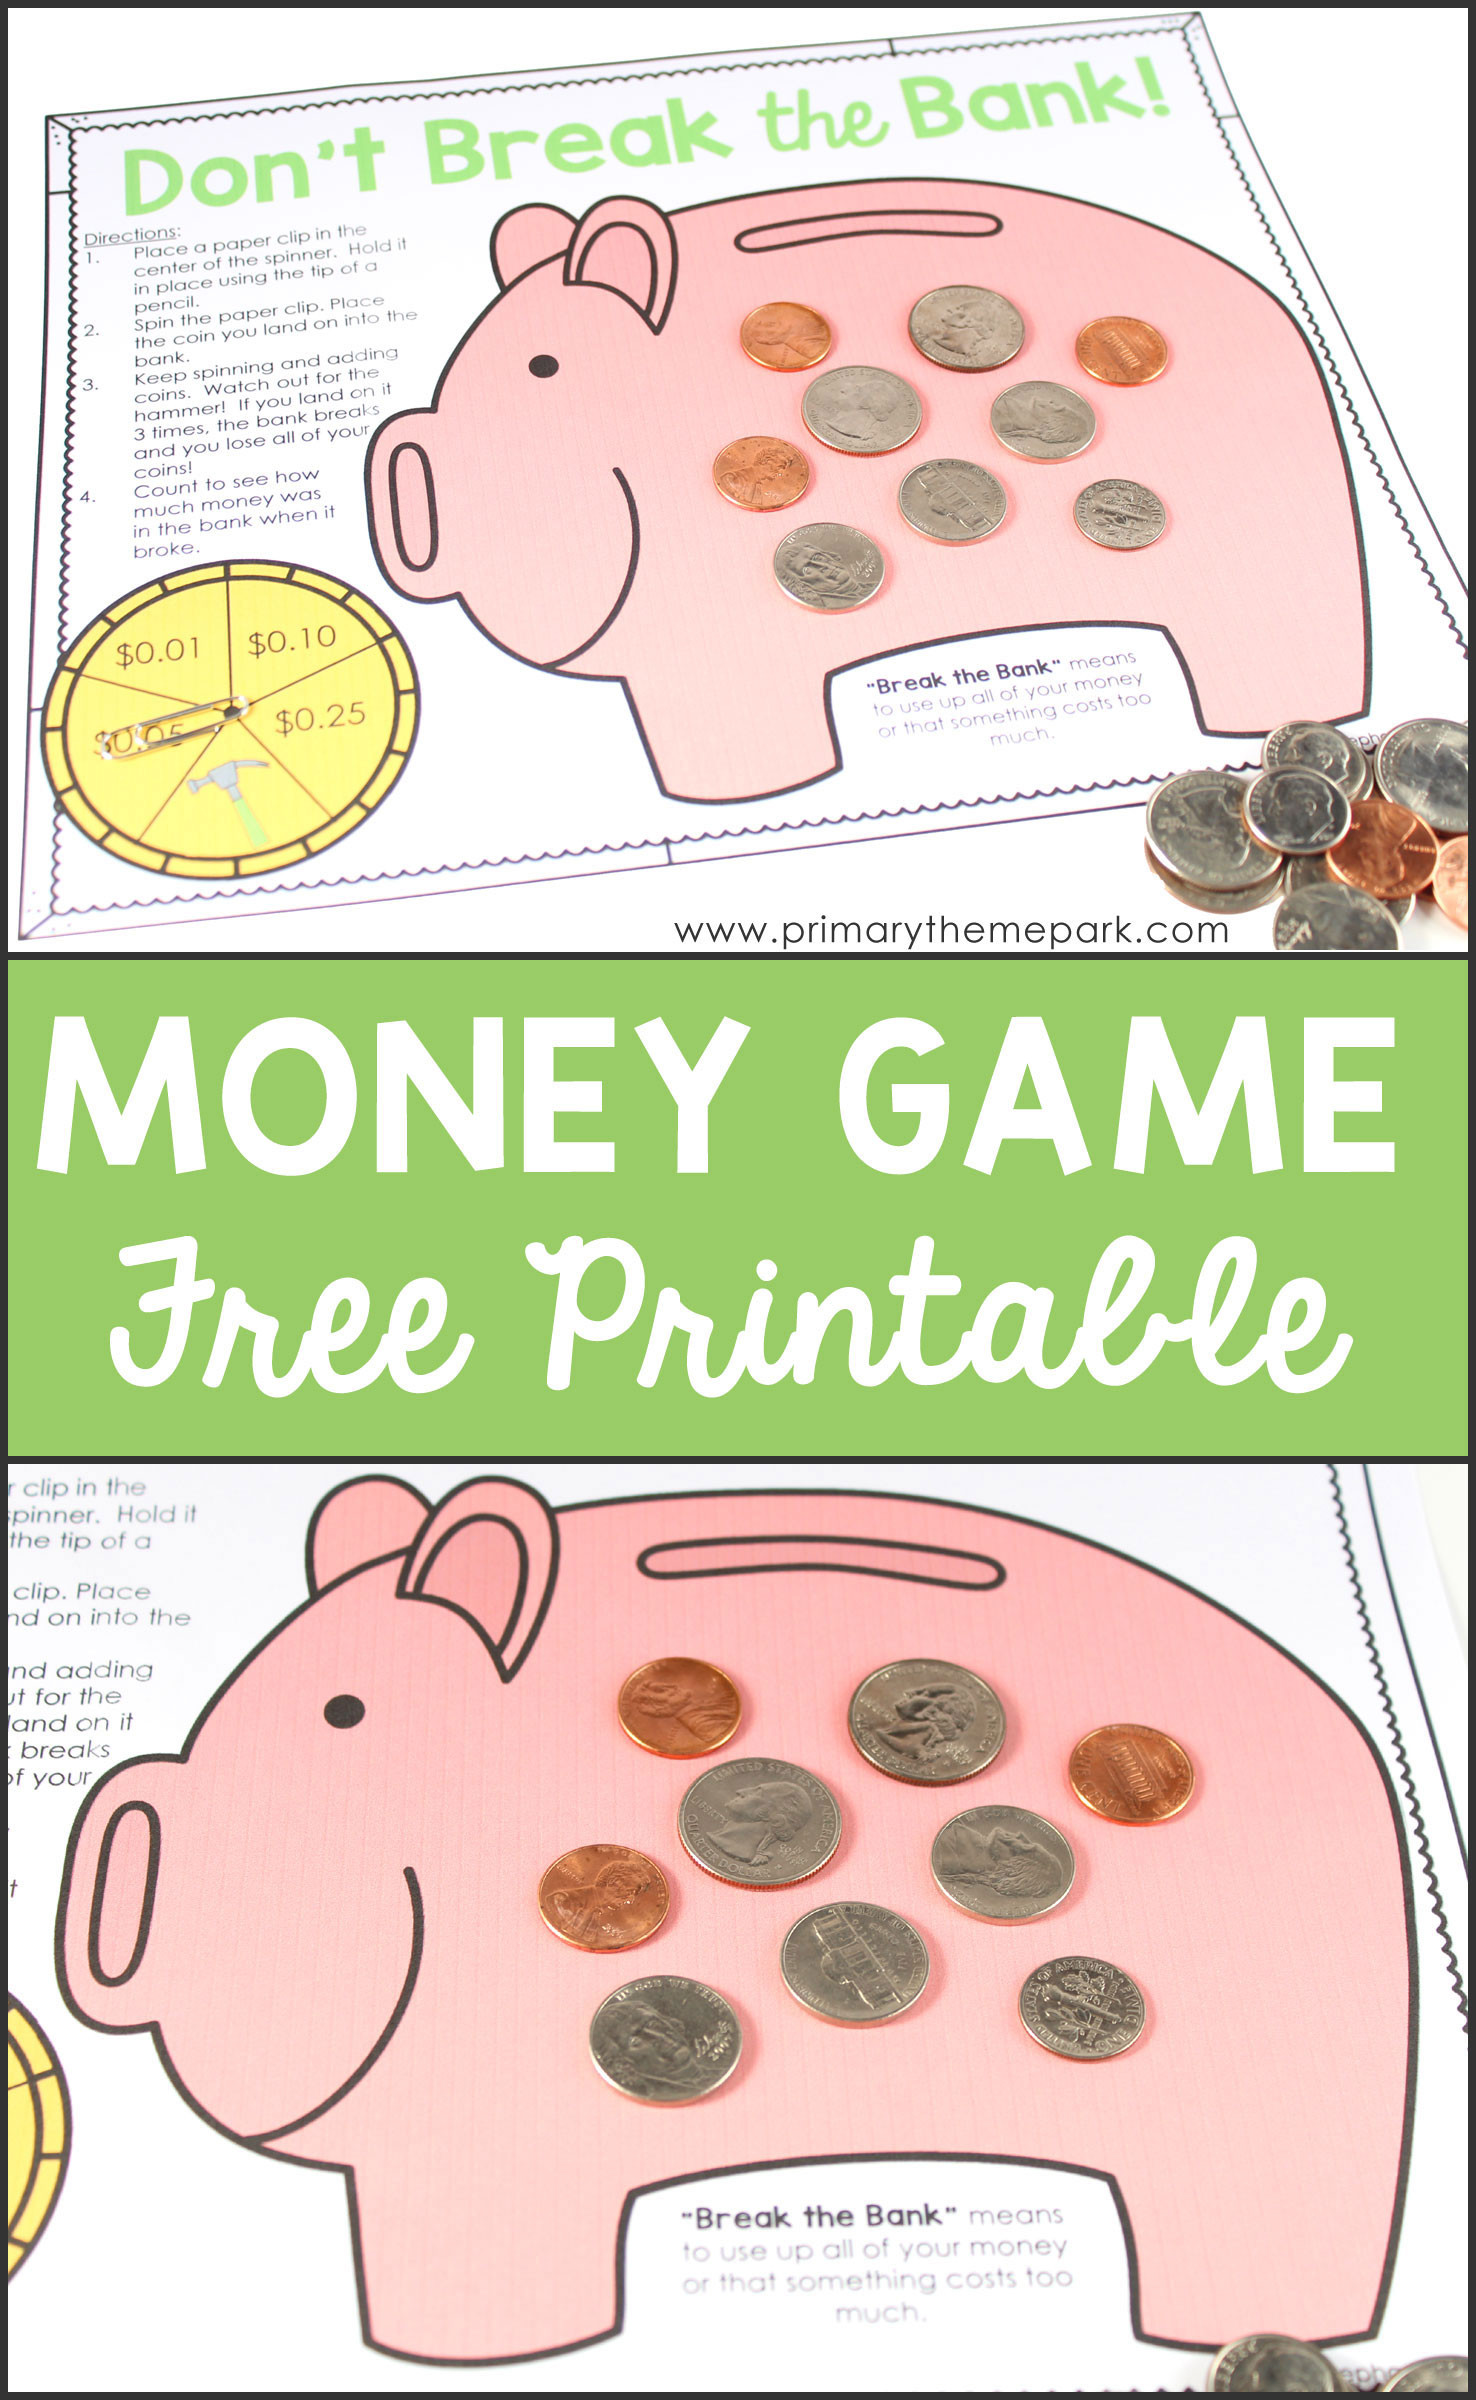 Free Math Worksheets Second Grade 2 Counting Money Counting Money Pennies Nickels Dimes Quarters 10 Coins